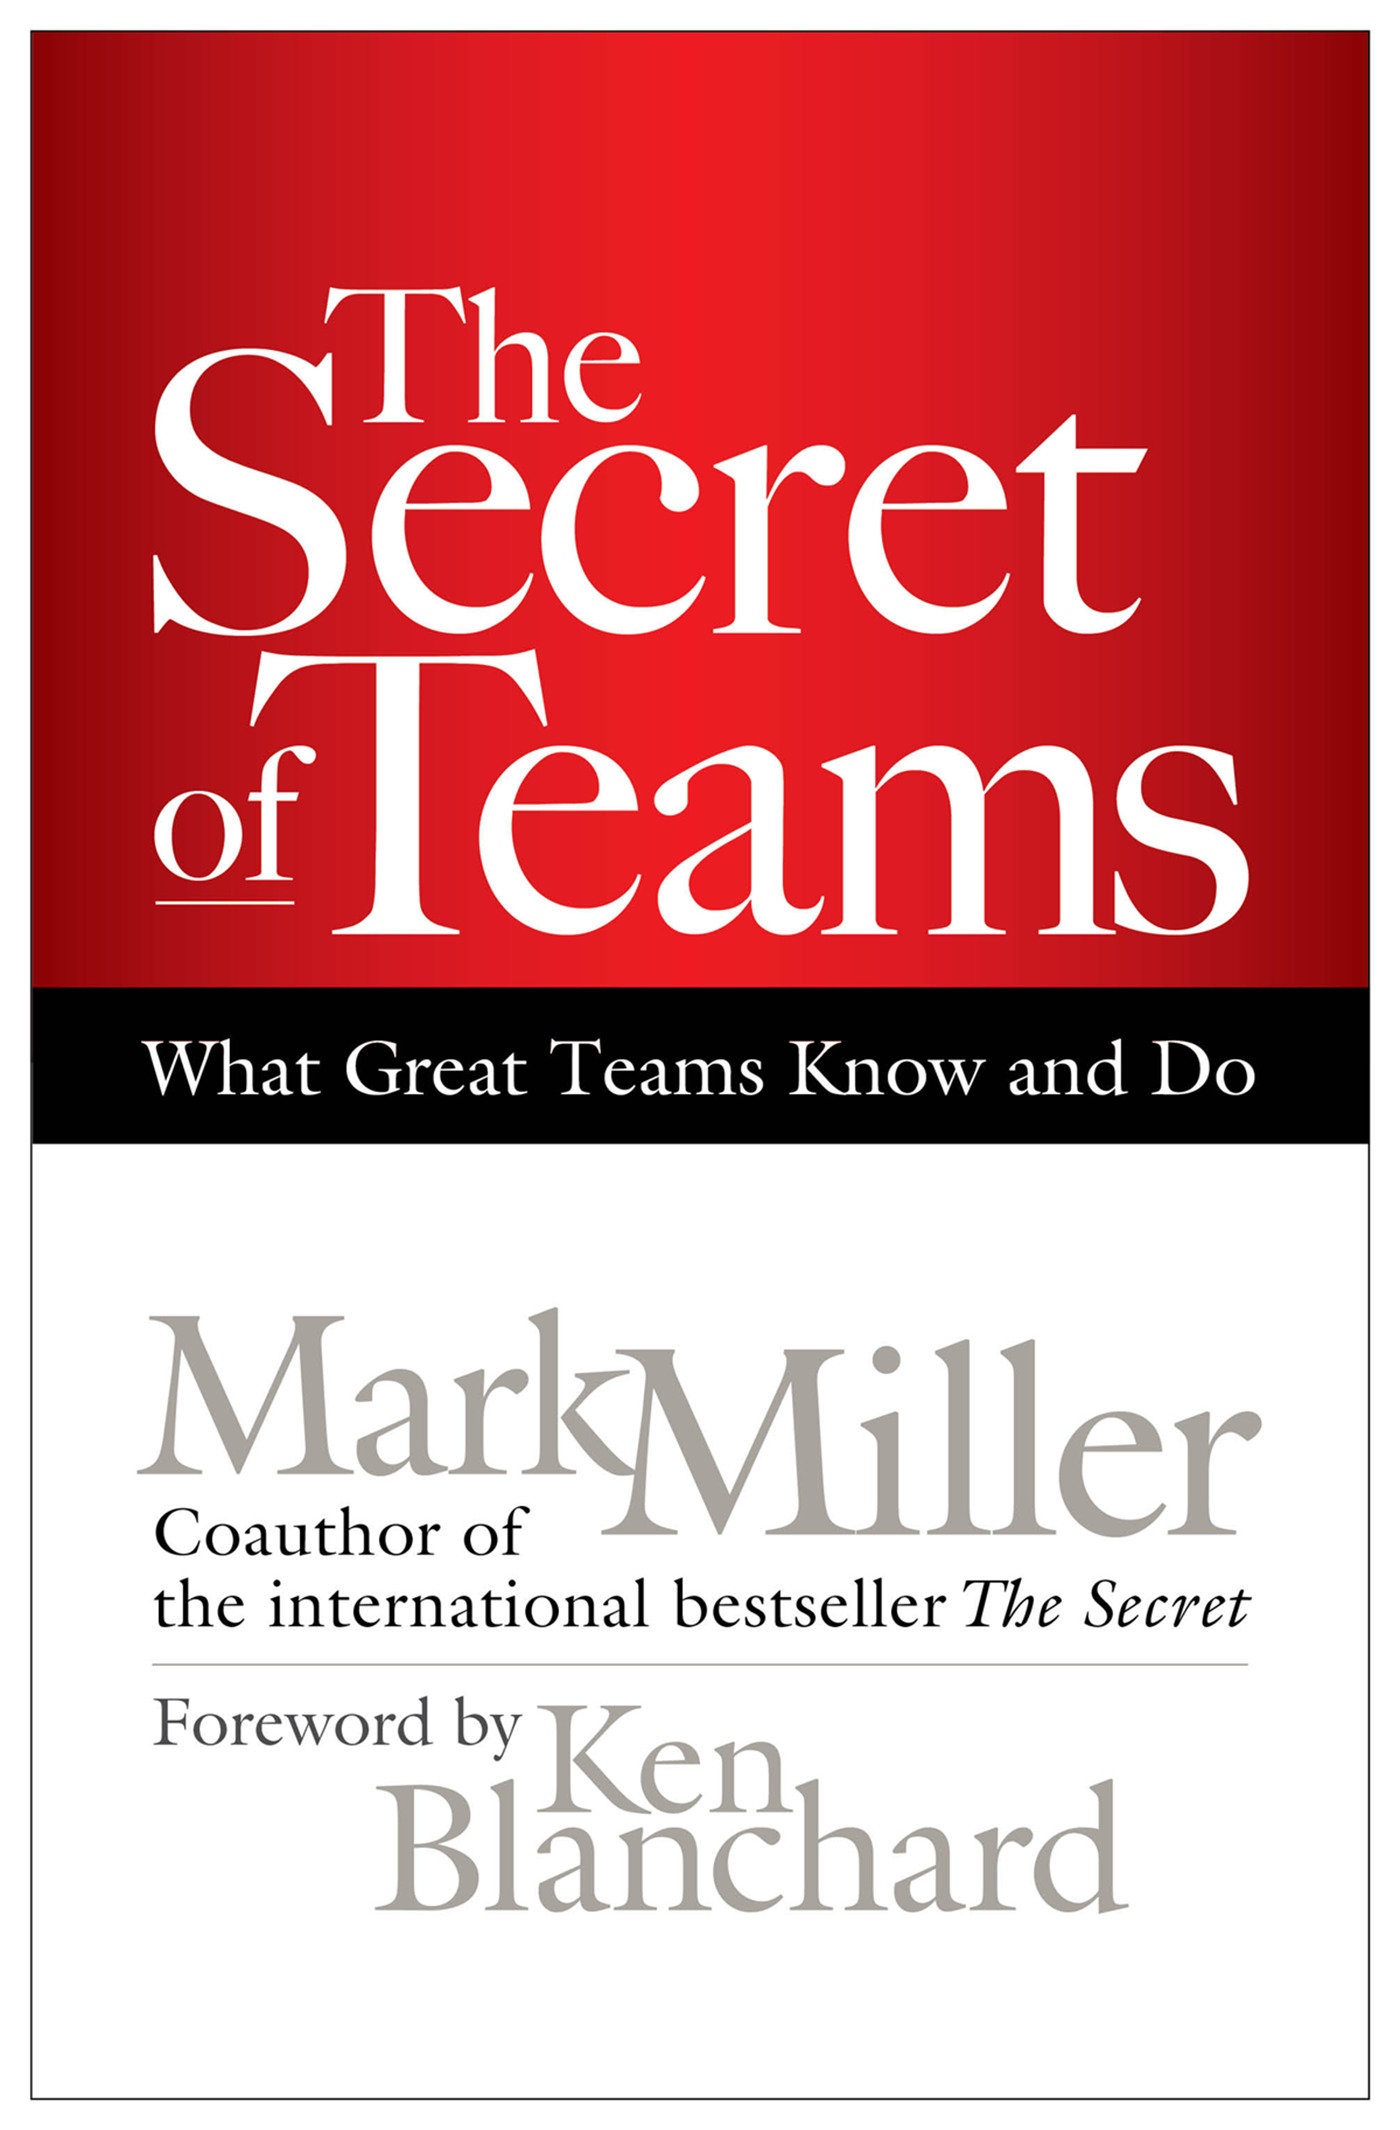 The Secret Of Teams (Hardcover Book)